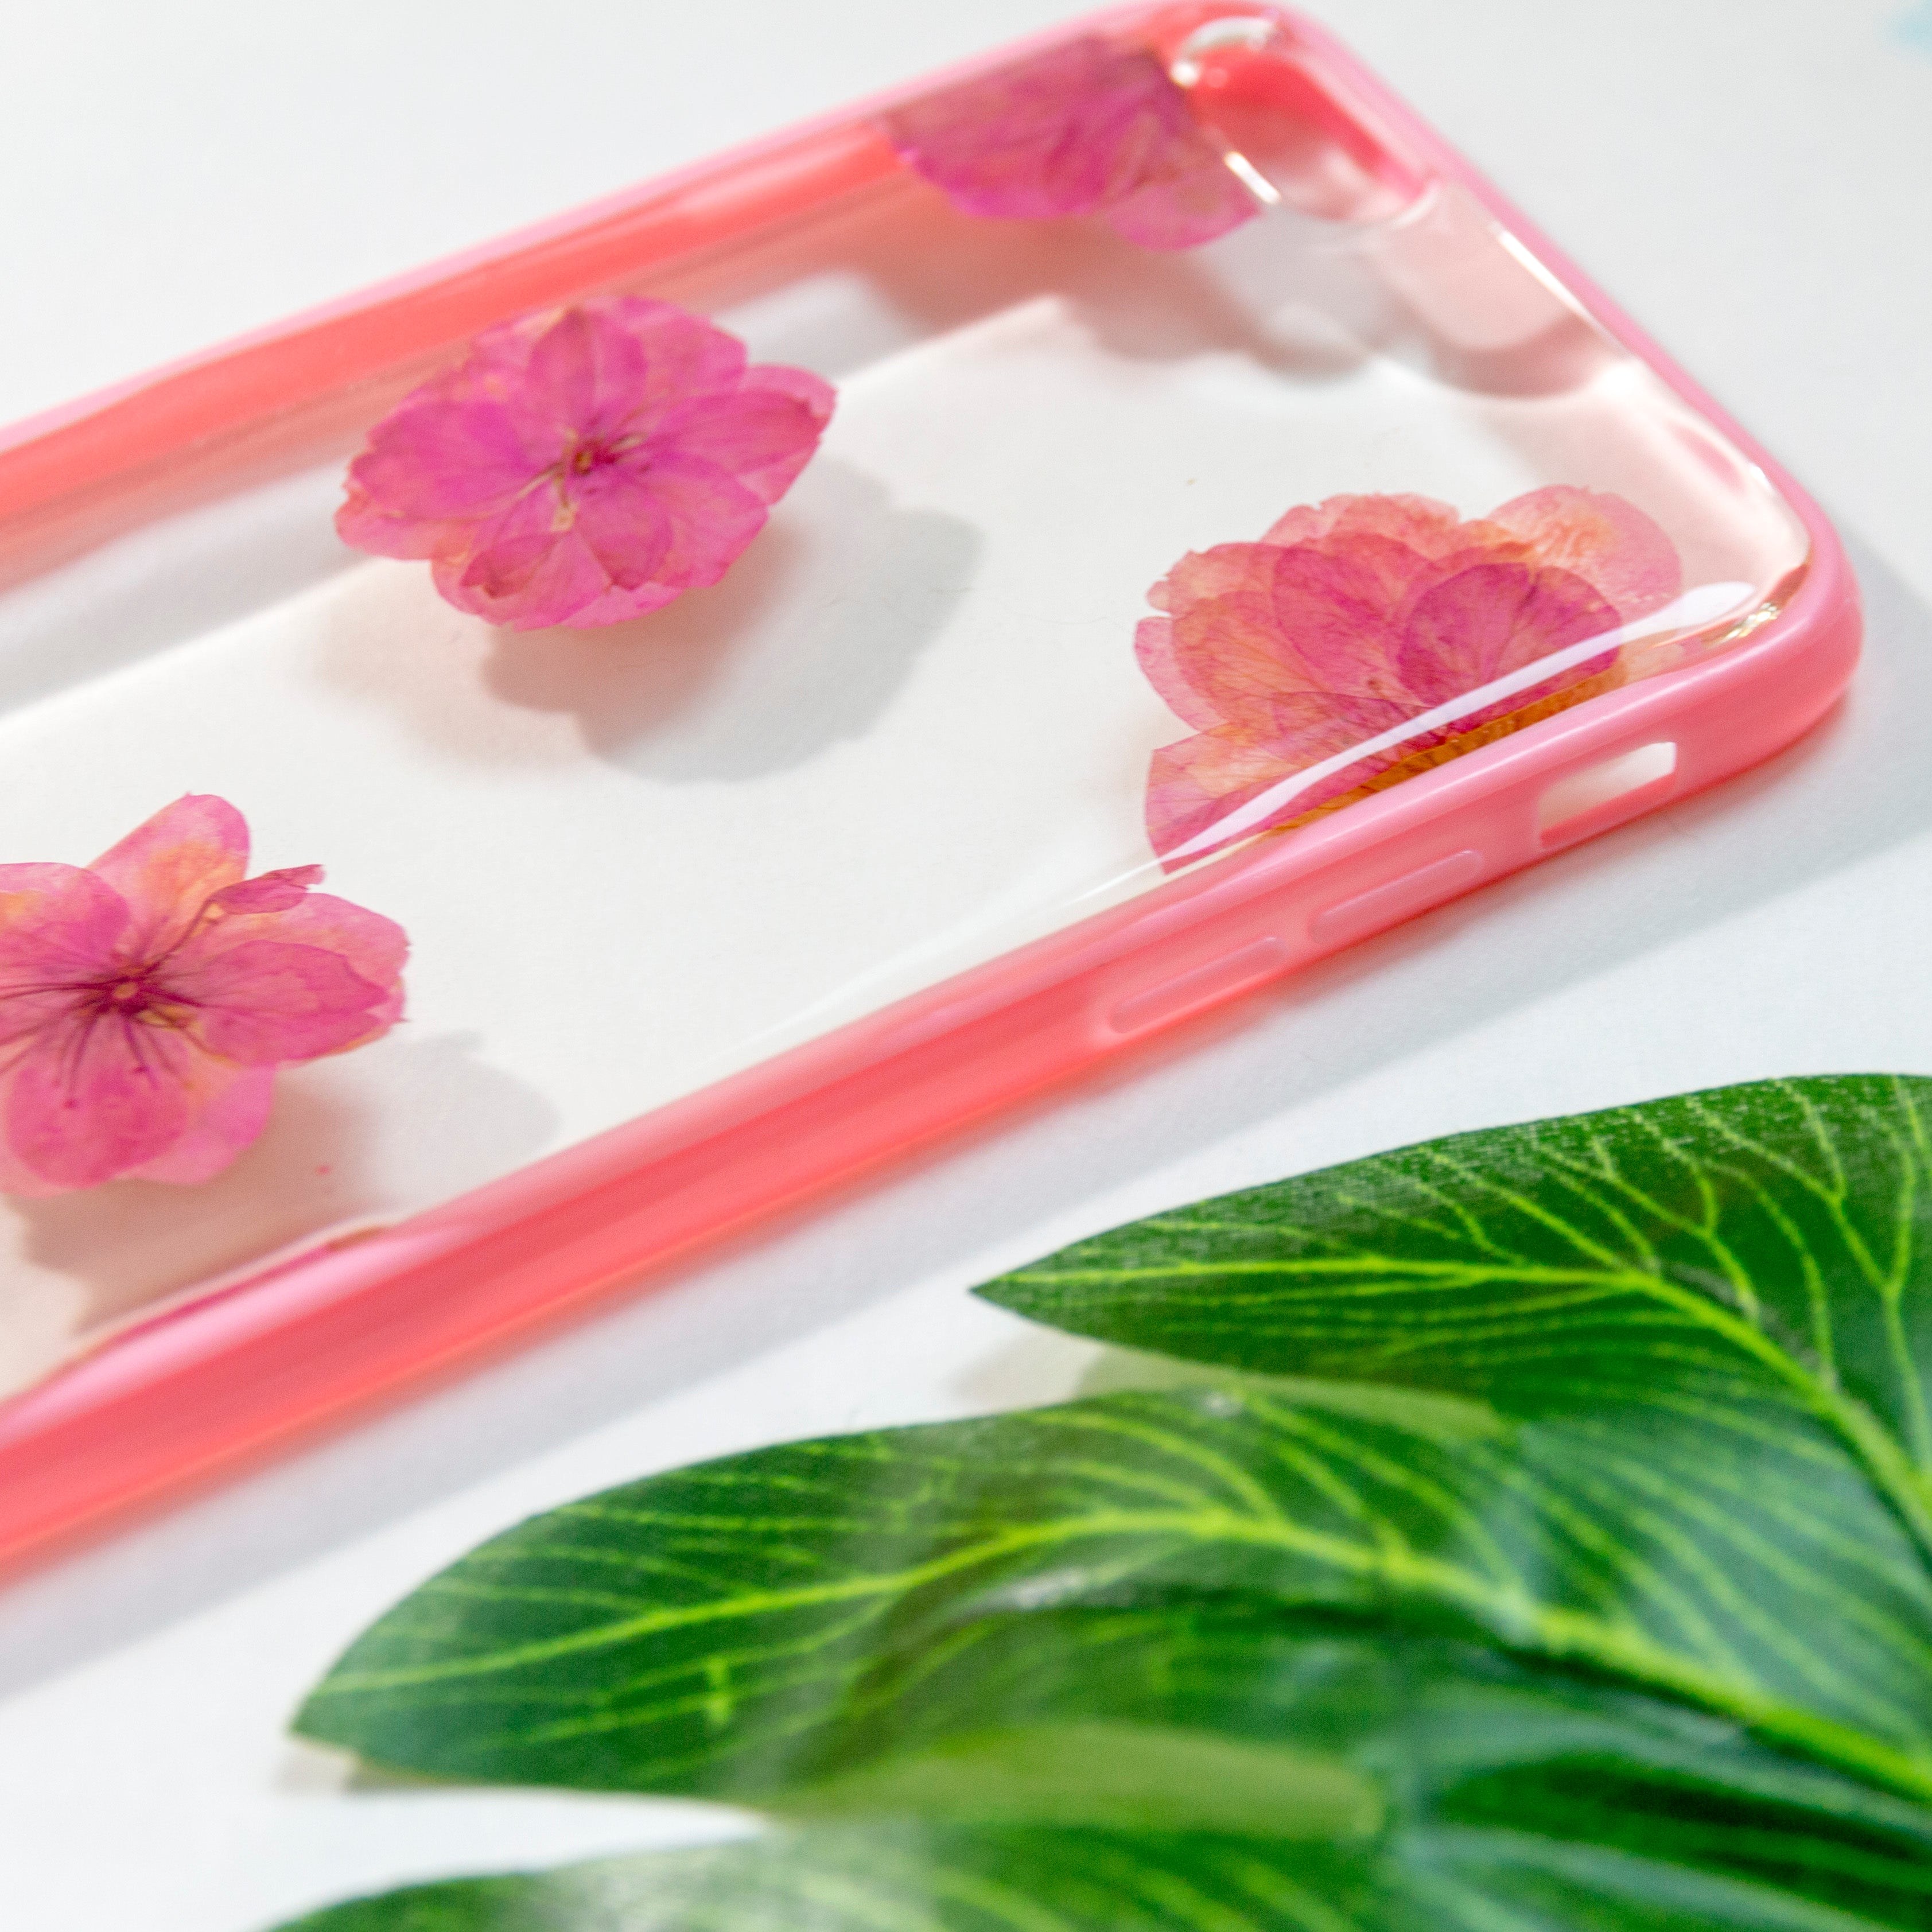 pressed_pink_cherry_blossom_flower_cute_protective_iPhone_6_6s_plus_floral_bumper_case_floral_neverland_floralfy_cherry_rain